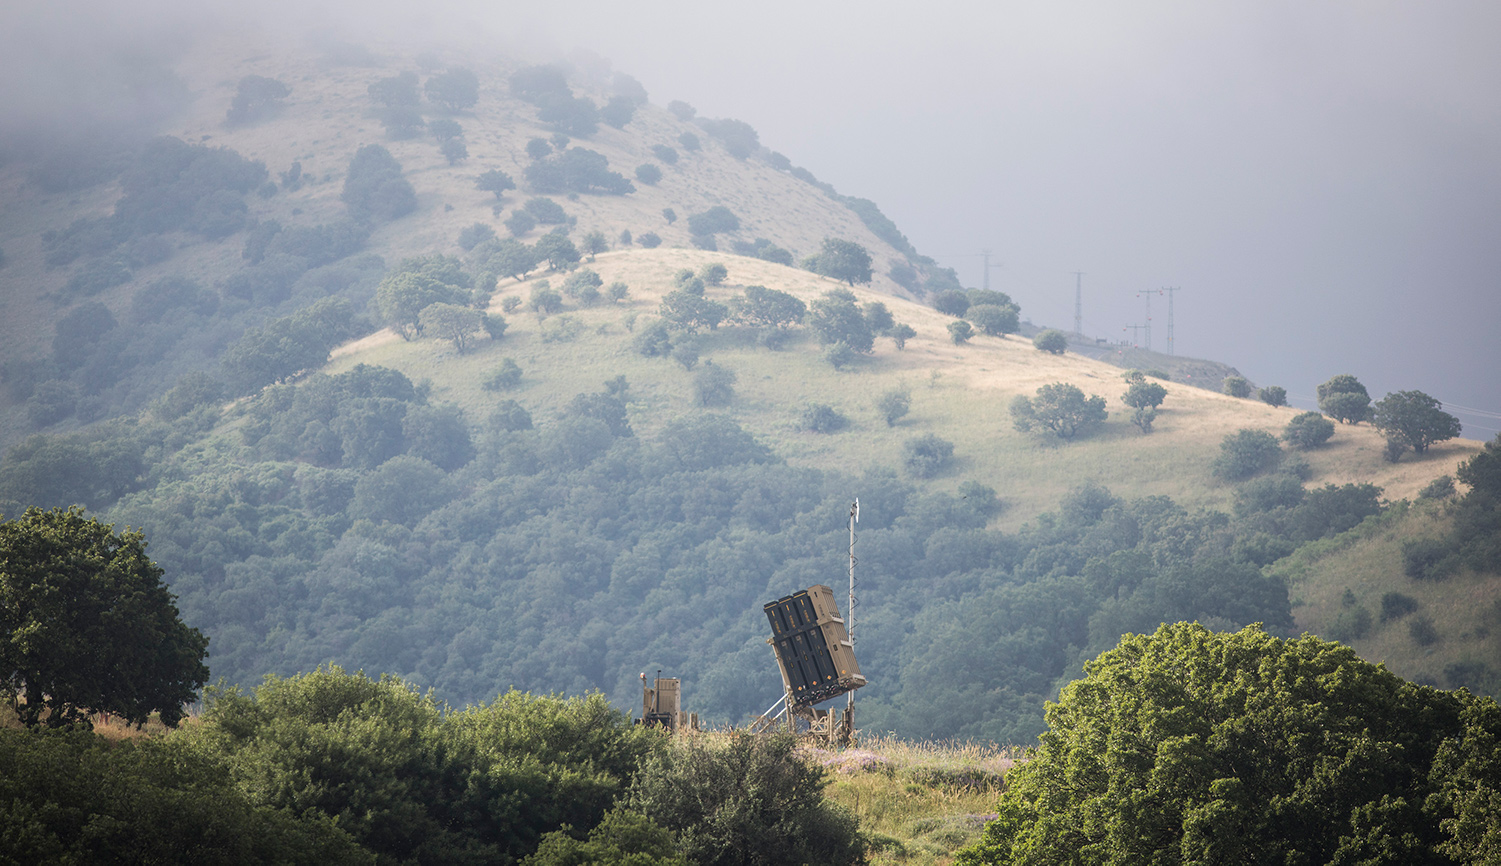 An Israeli Iron Dome rocket-defense system, built in partnership with the U.S., stationed in the Golan Heights. Ilia Yefimovich/picture alliance via Getty Images.
